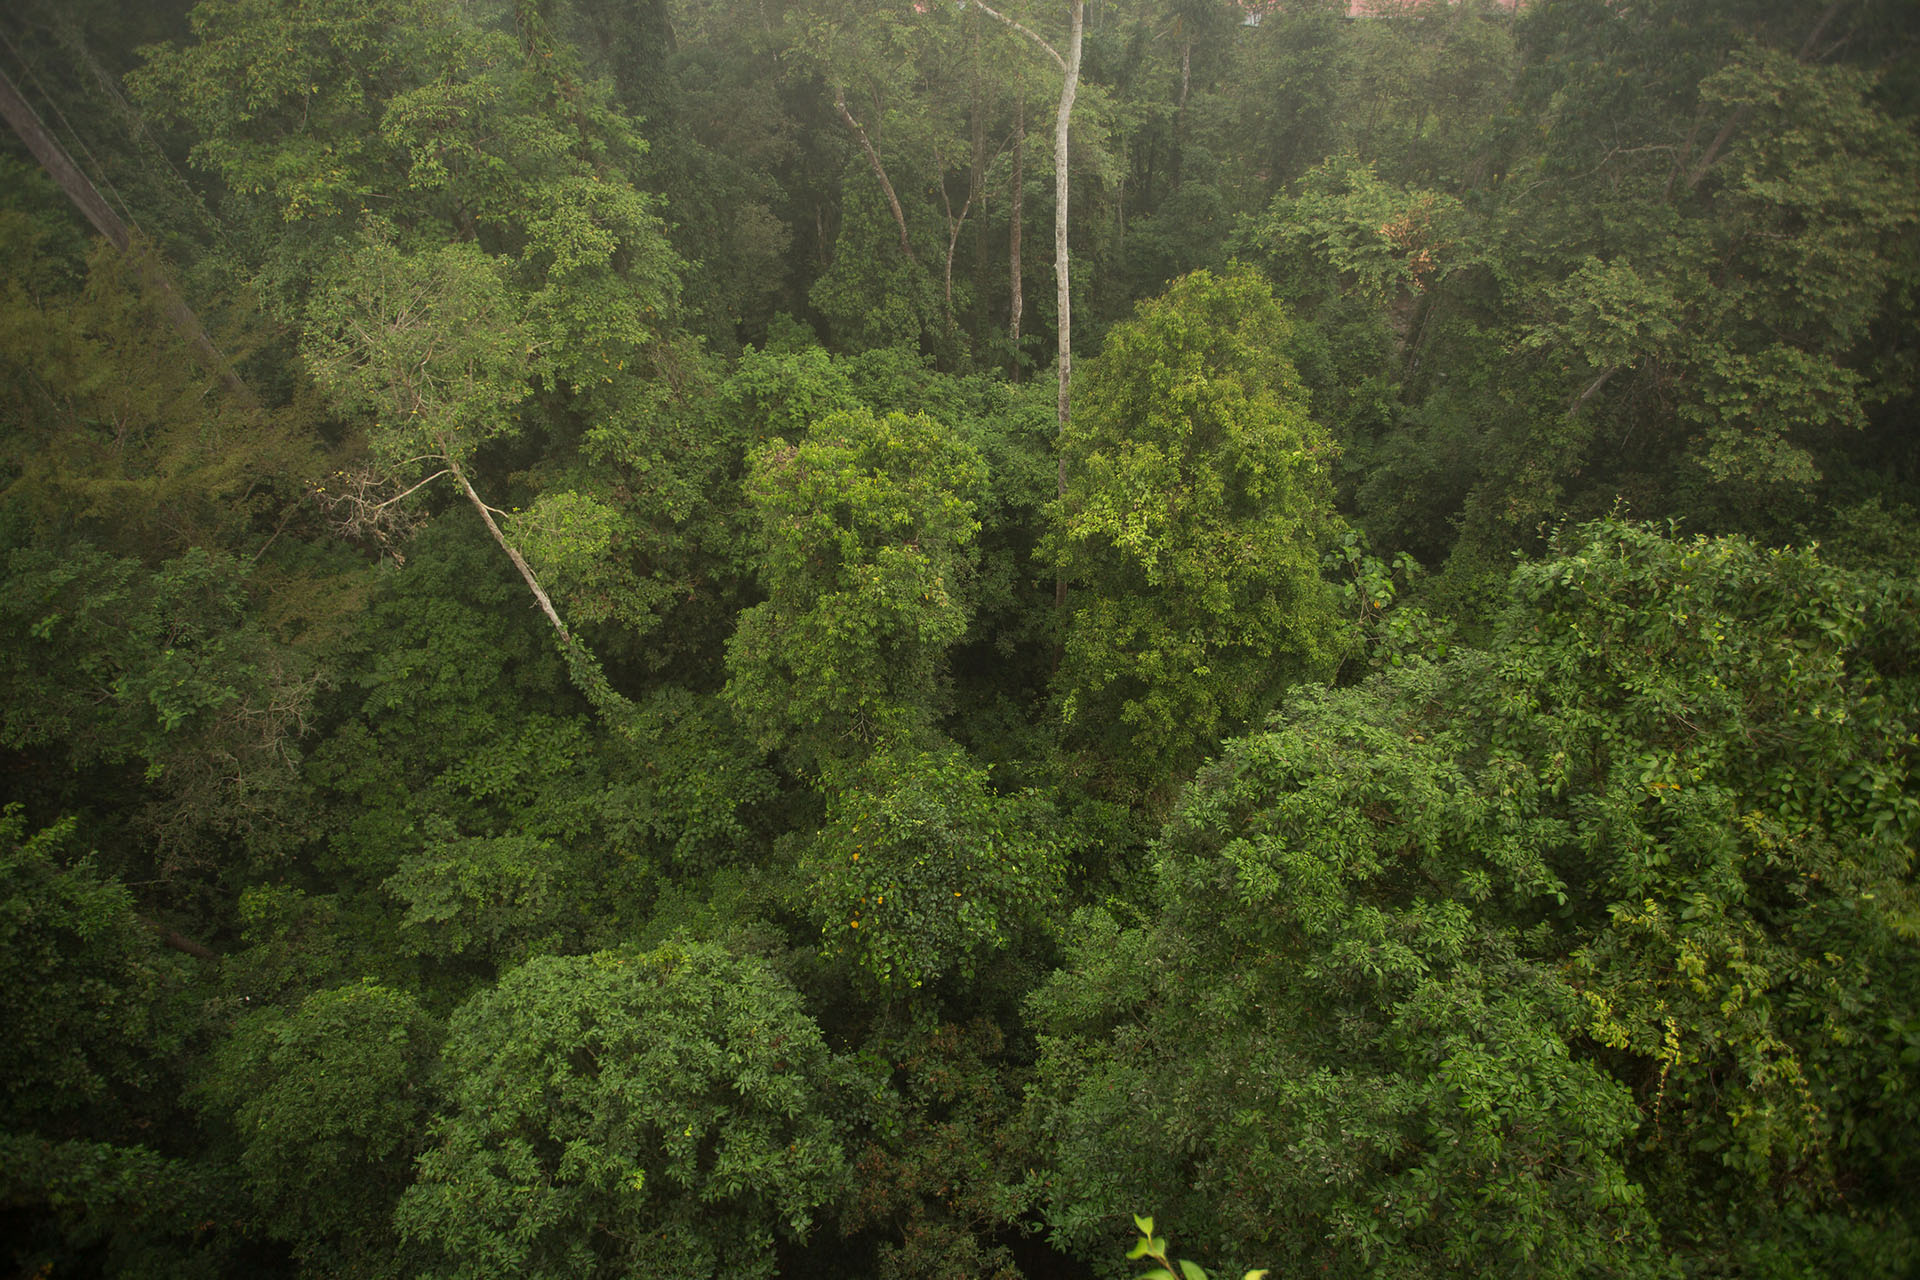 The Green Gigaton Challenge: Bringing REDD+ to Scale